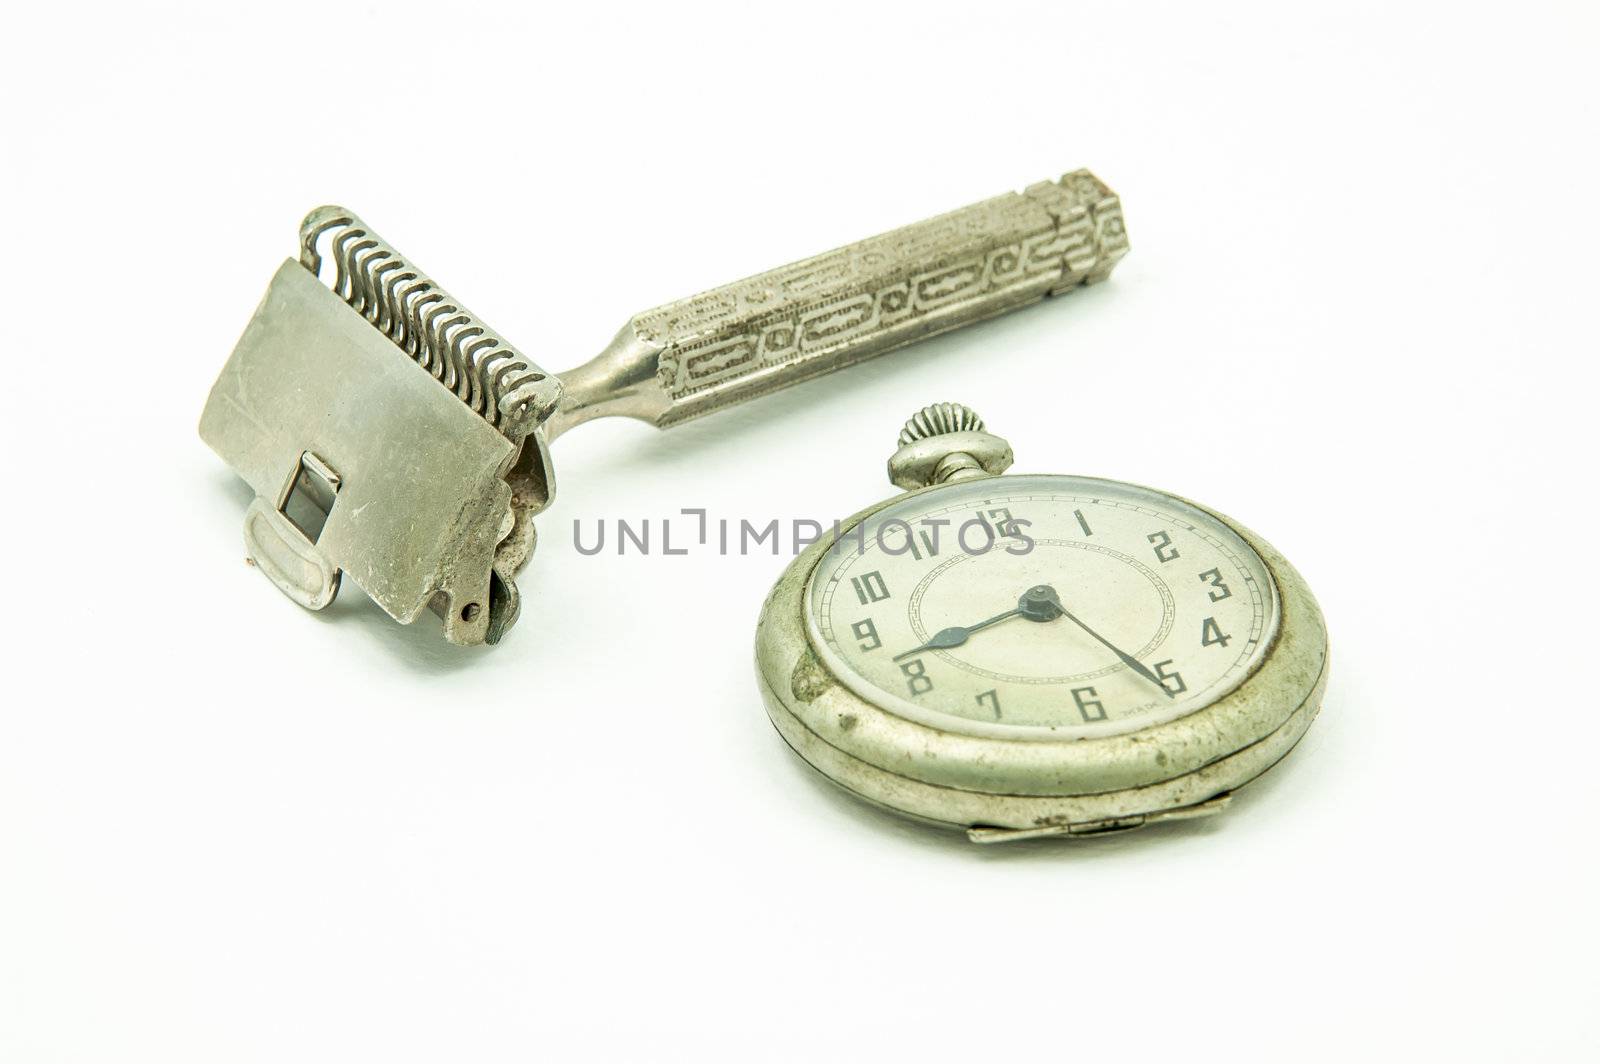 Old pocket watch and shaving device by saap585